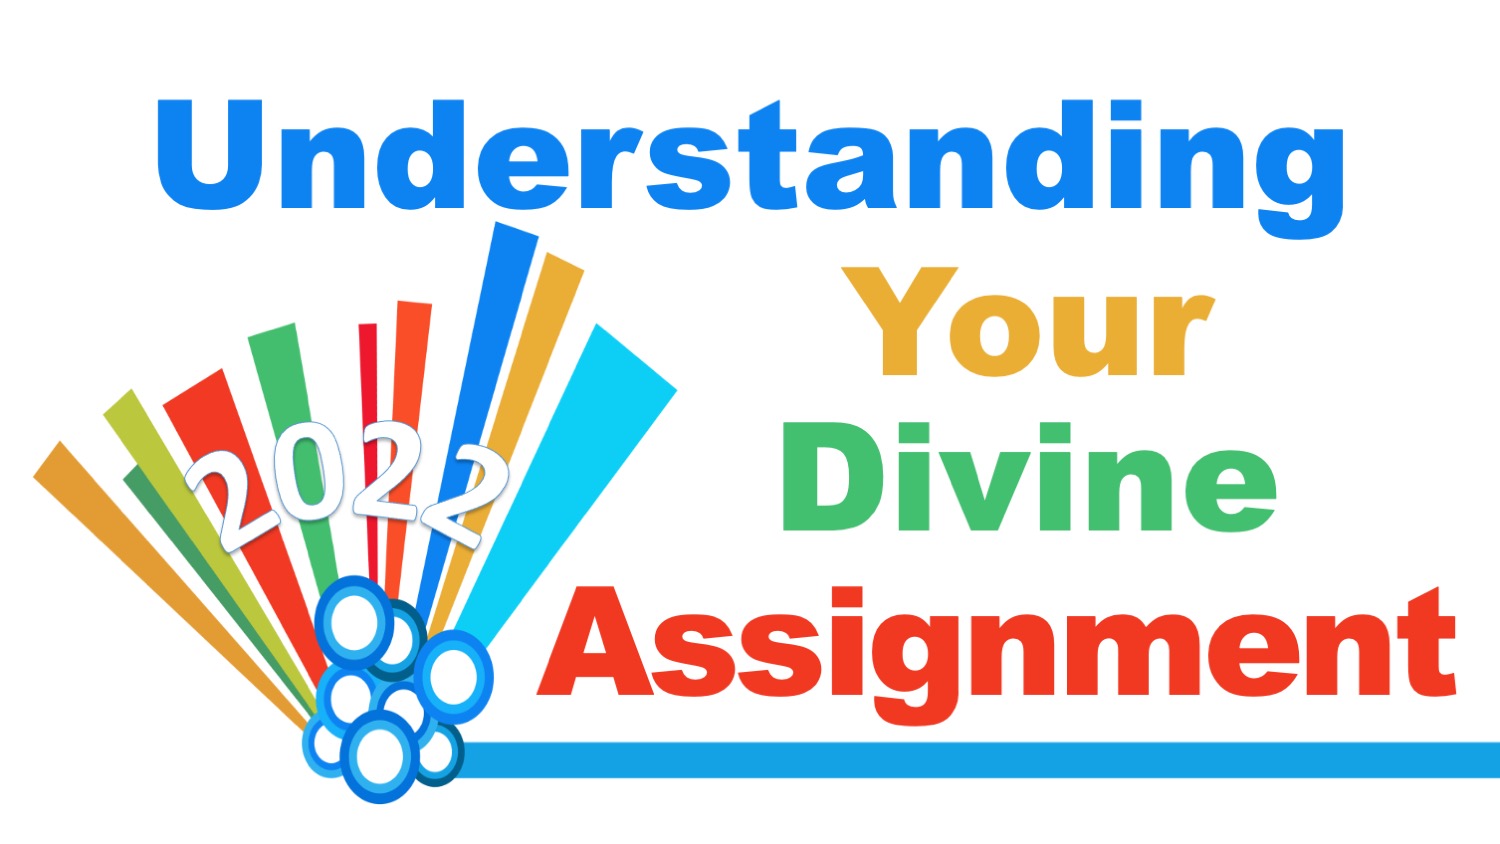 discovering your divine assignment